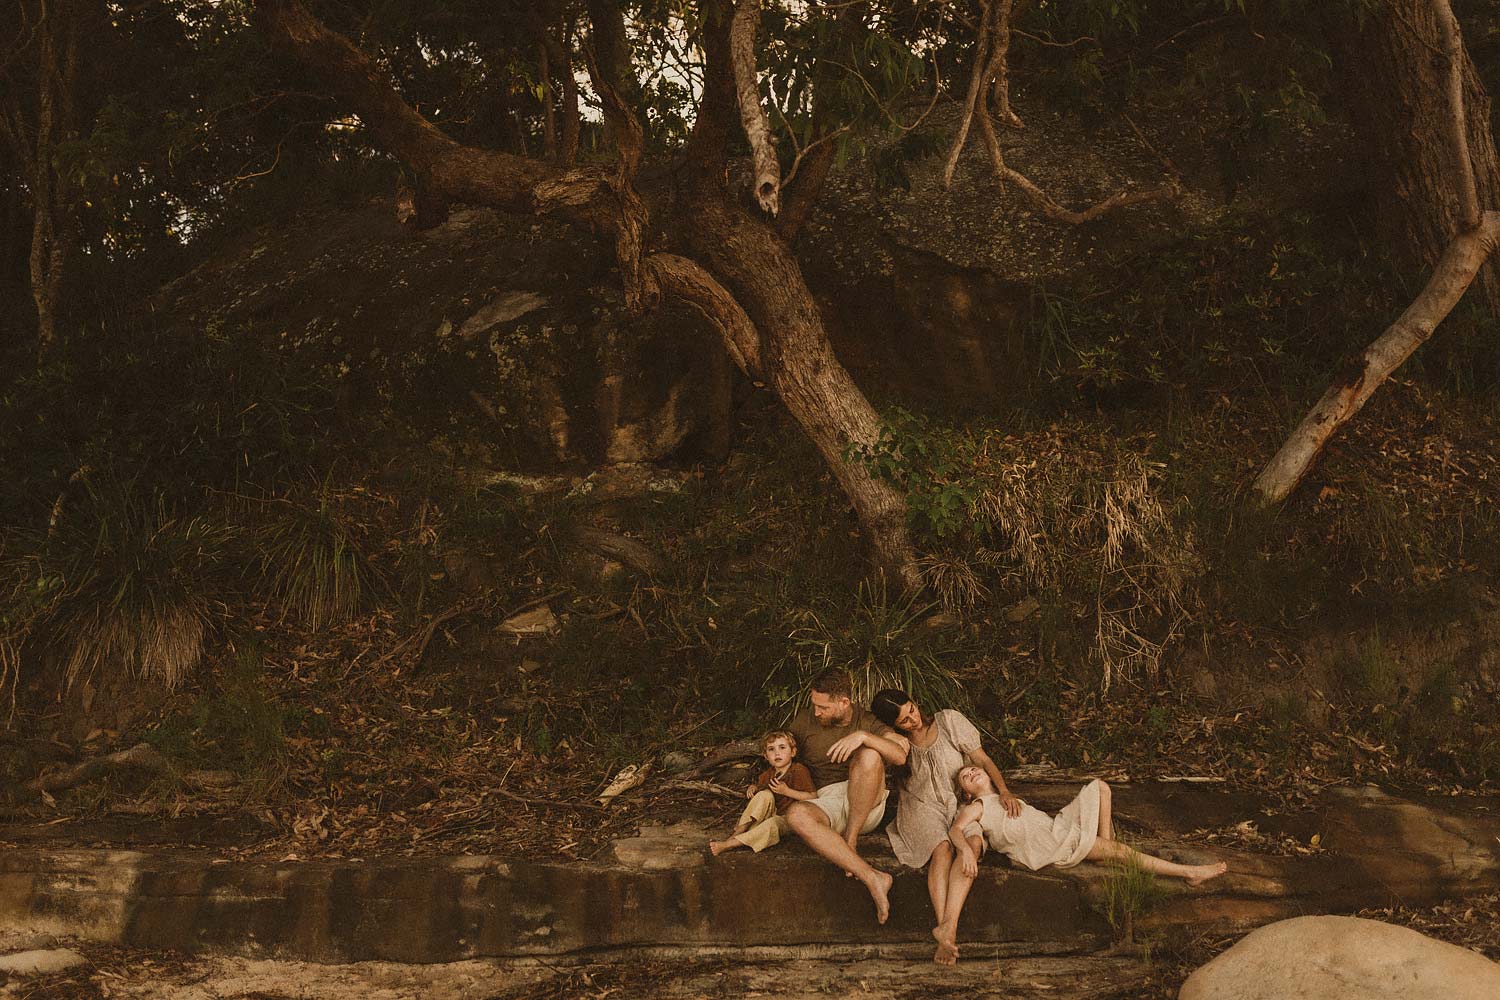 Sutherland-shire-family-photographer-family-of-four-sitting-on-a-large-flat-rock-amidst-rustic-bushland-background-mum-holds-onto-dads-arm-while-little-girl-rests-on-mum-and-looks-up-at-her-and-little-boy-sits-with-his-legs-tucked-under-next-to-his-dad-who-looks-down-at-him